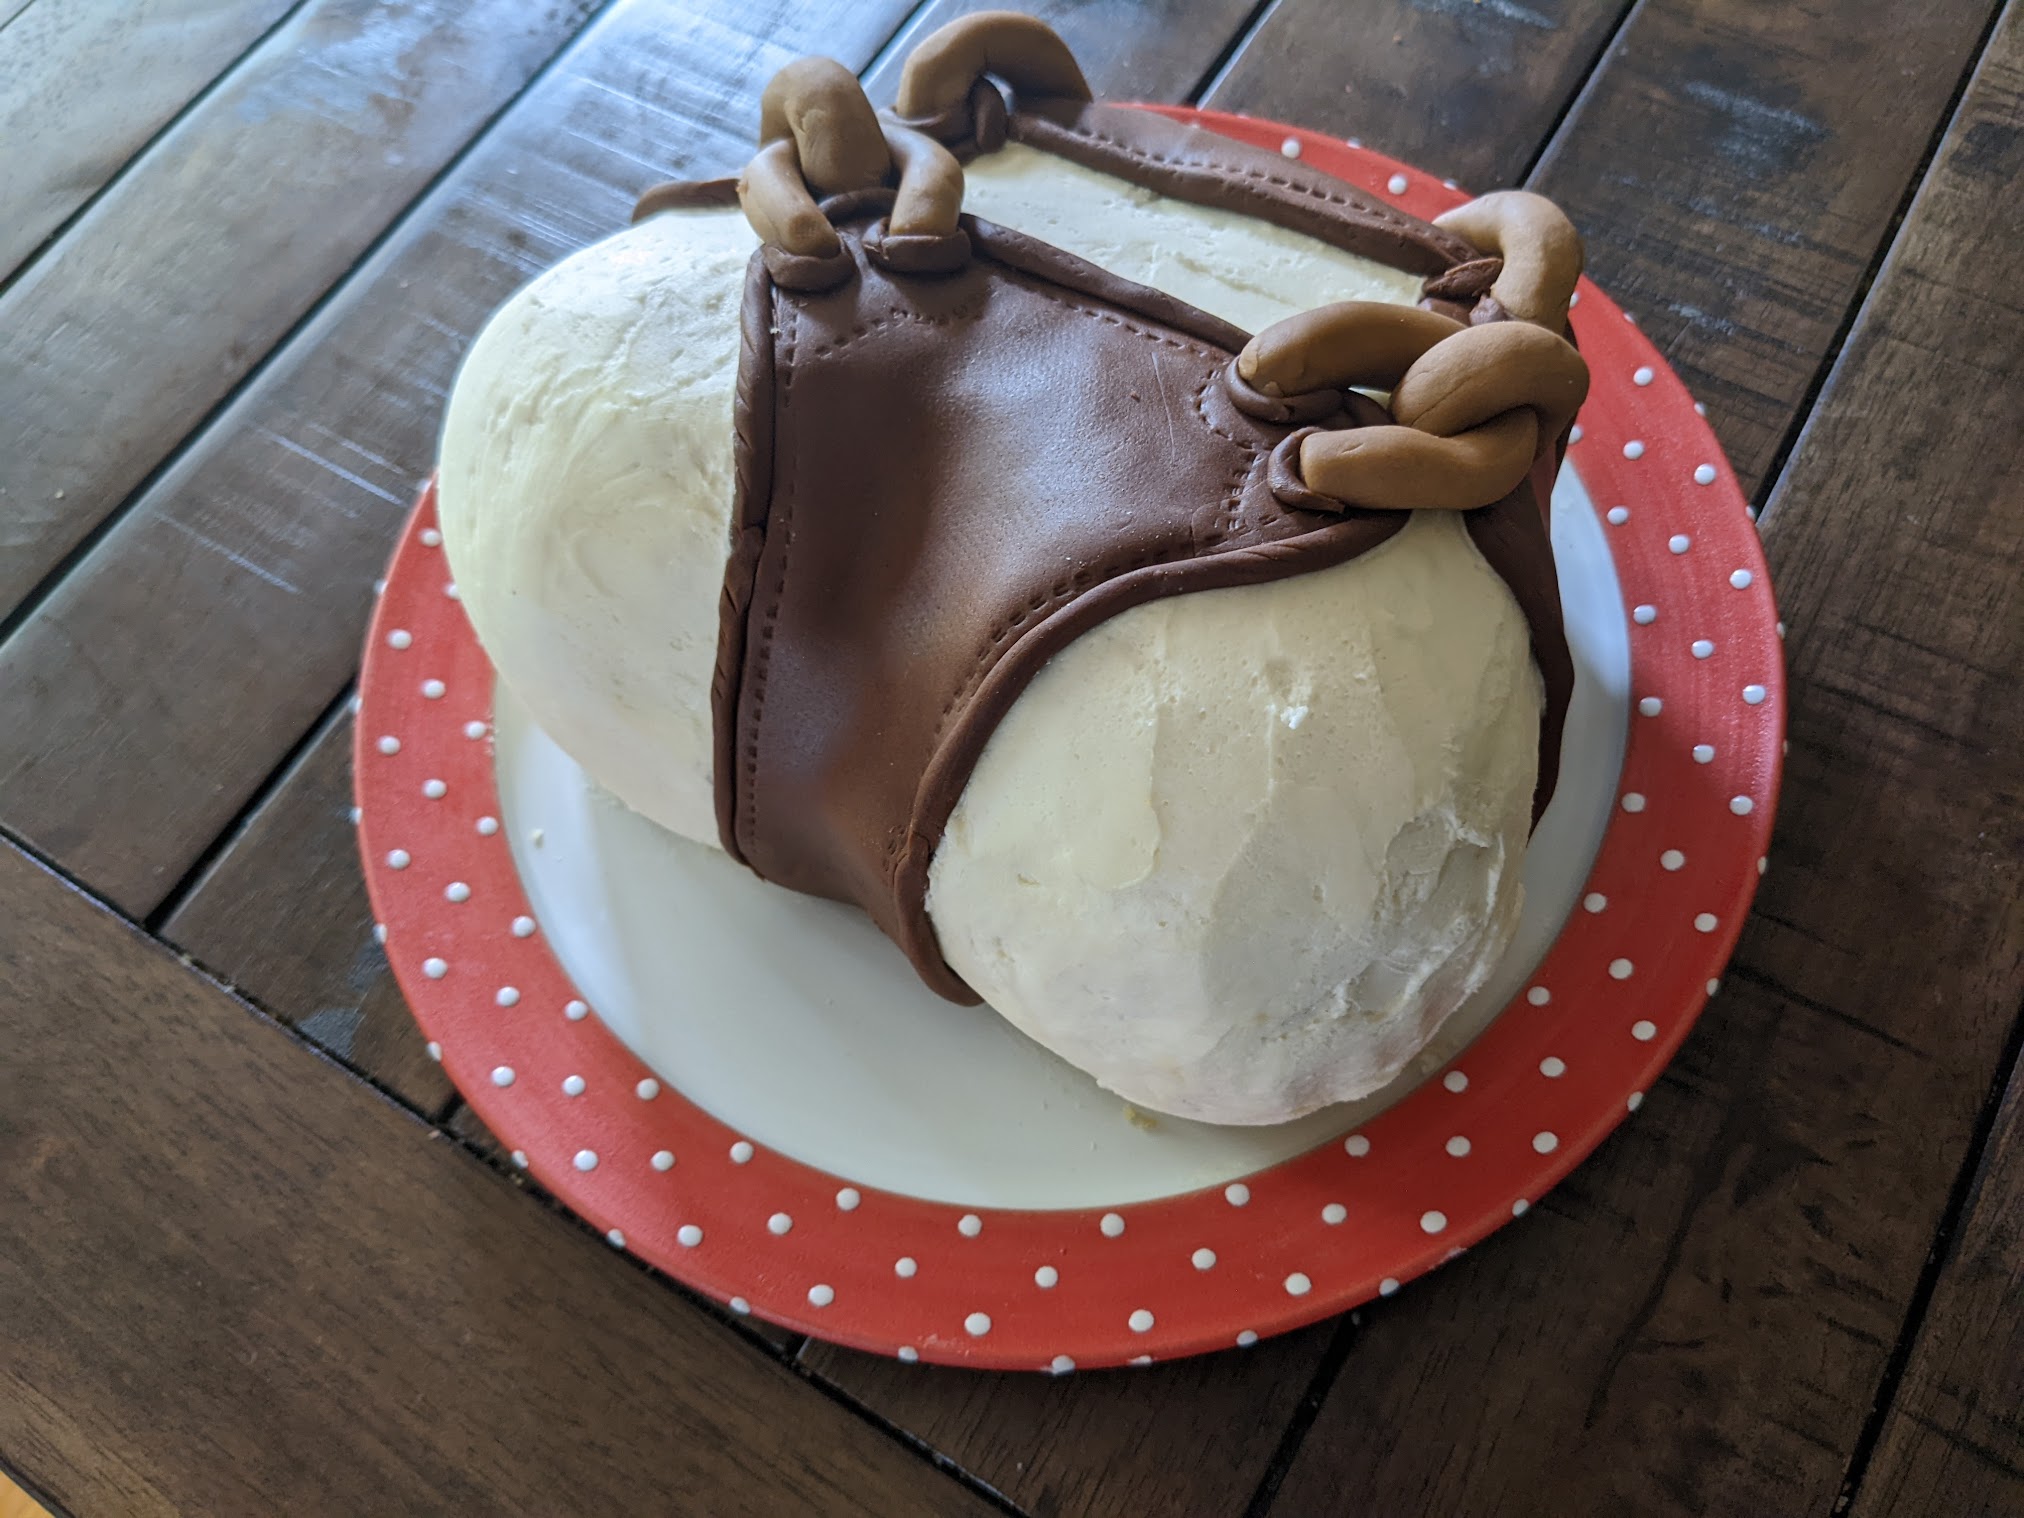 A cake in the shape of Ramza Beoulve's ass as it appears in Chapter 4 of the game